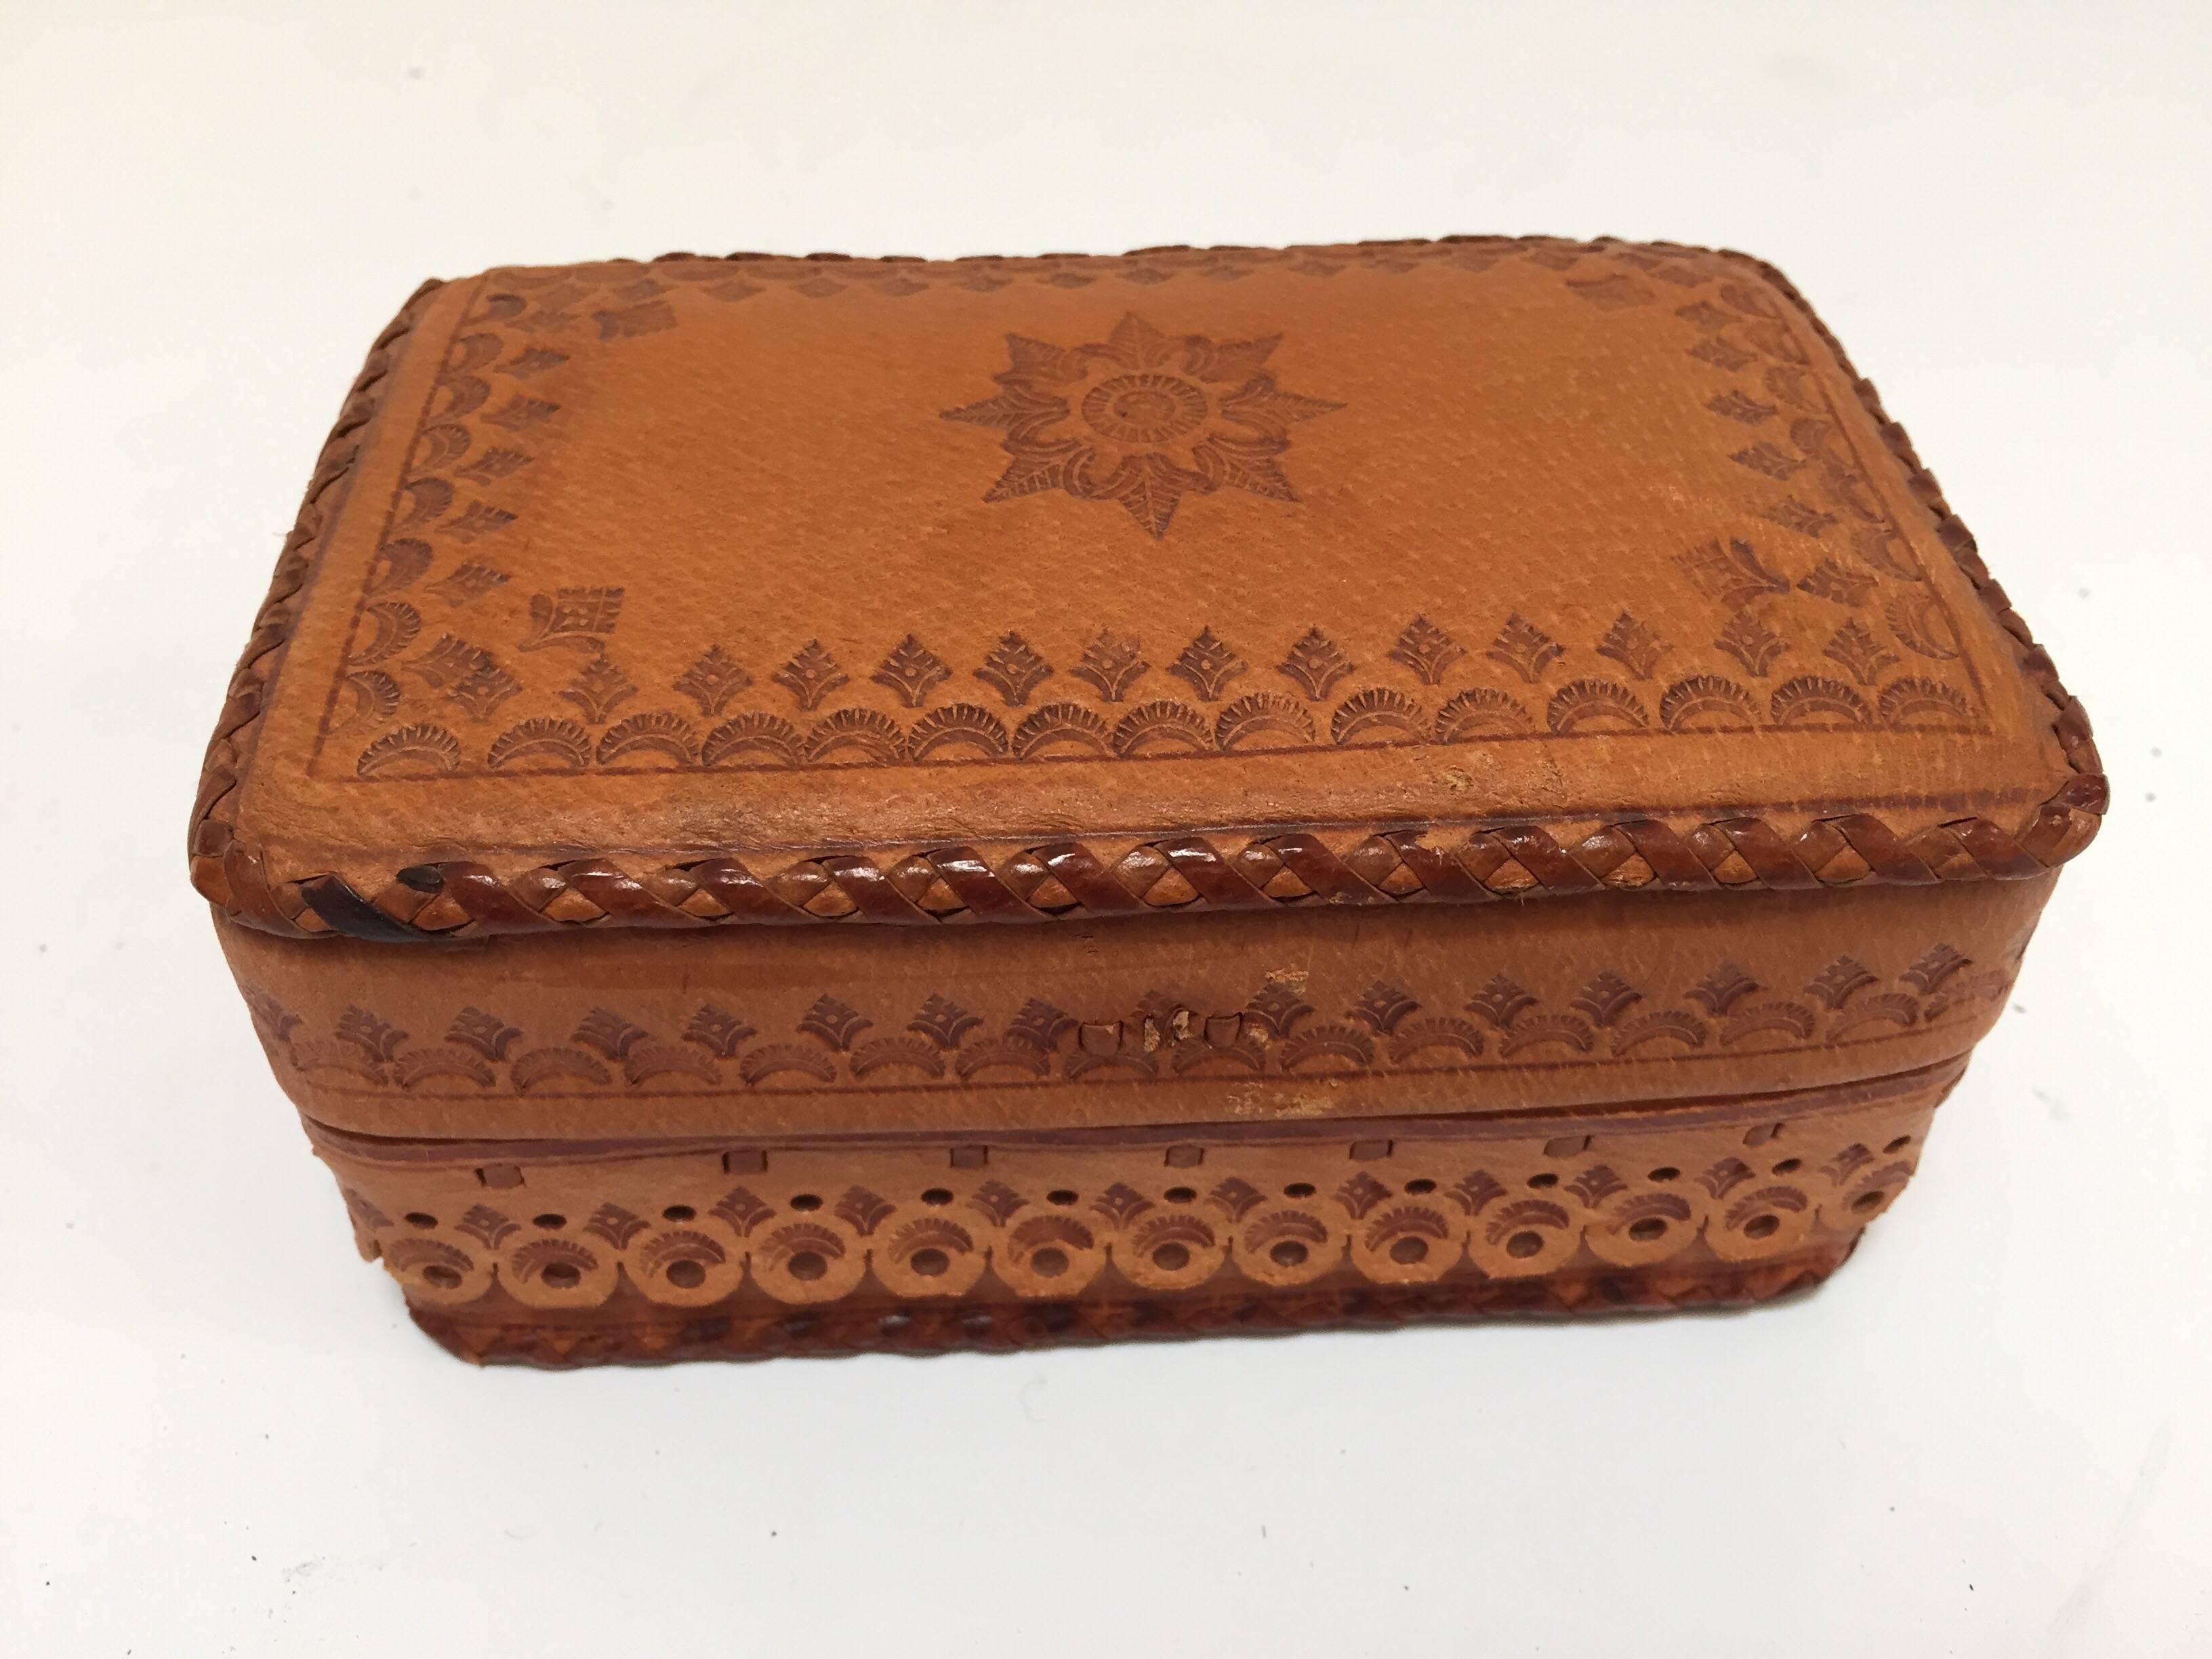 Hand tooled vintage leather box from Morocco camel color stamped with darker brown.
The workmanship of this piece is very fine, hand stamped and sewn with leather by the Berber tribes of Morocco.
Beautifully handcrafted and designed with classic